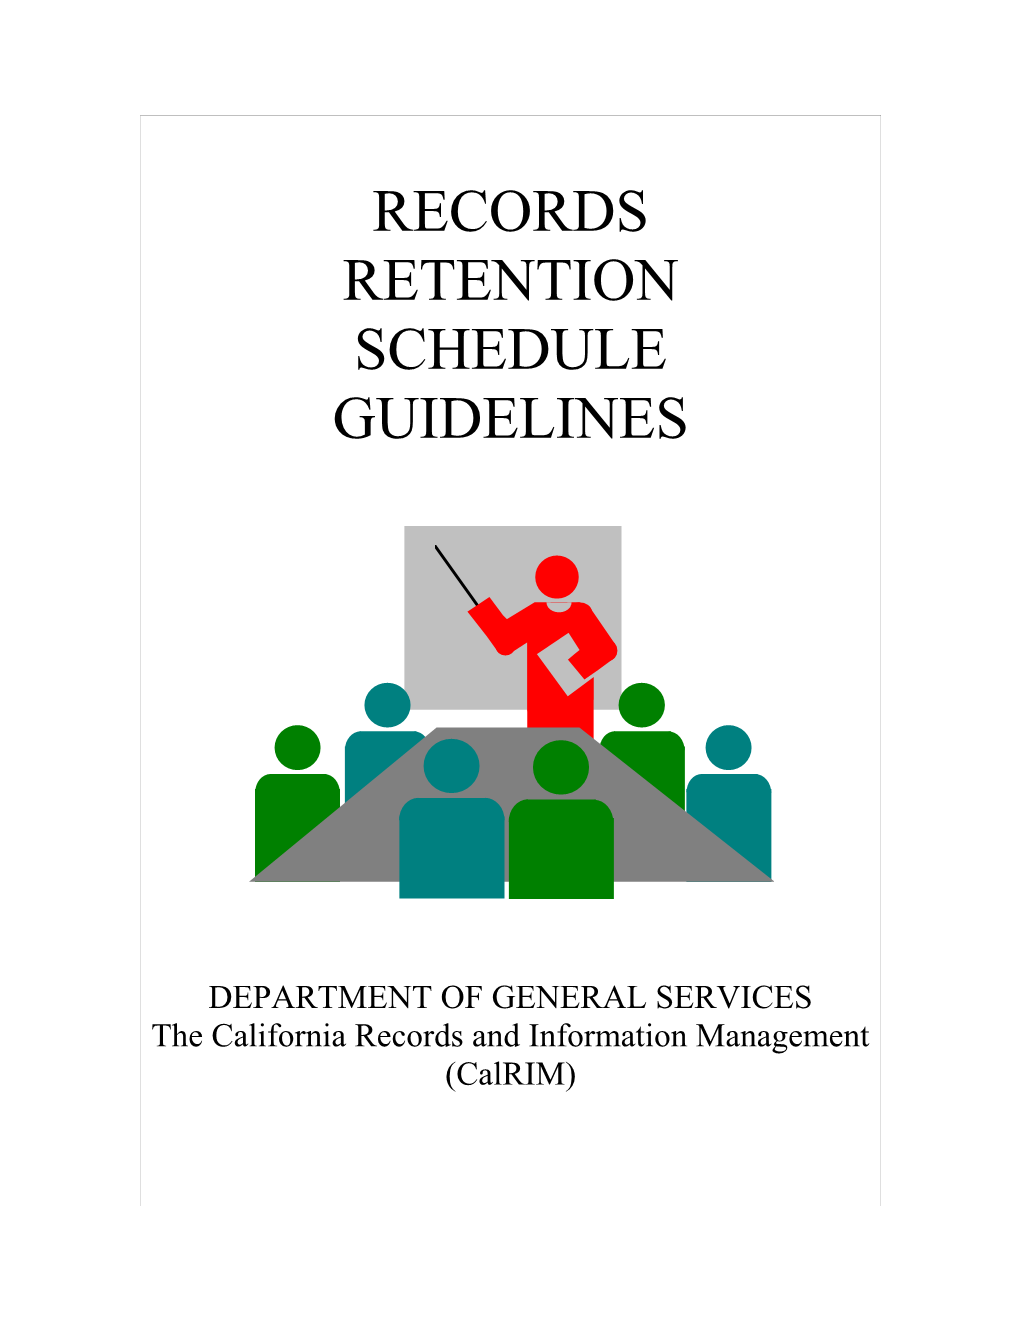 The California Records and Information Management s1